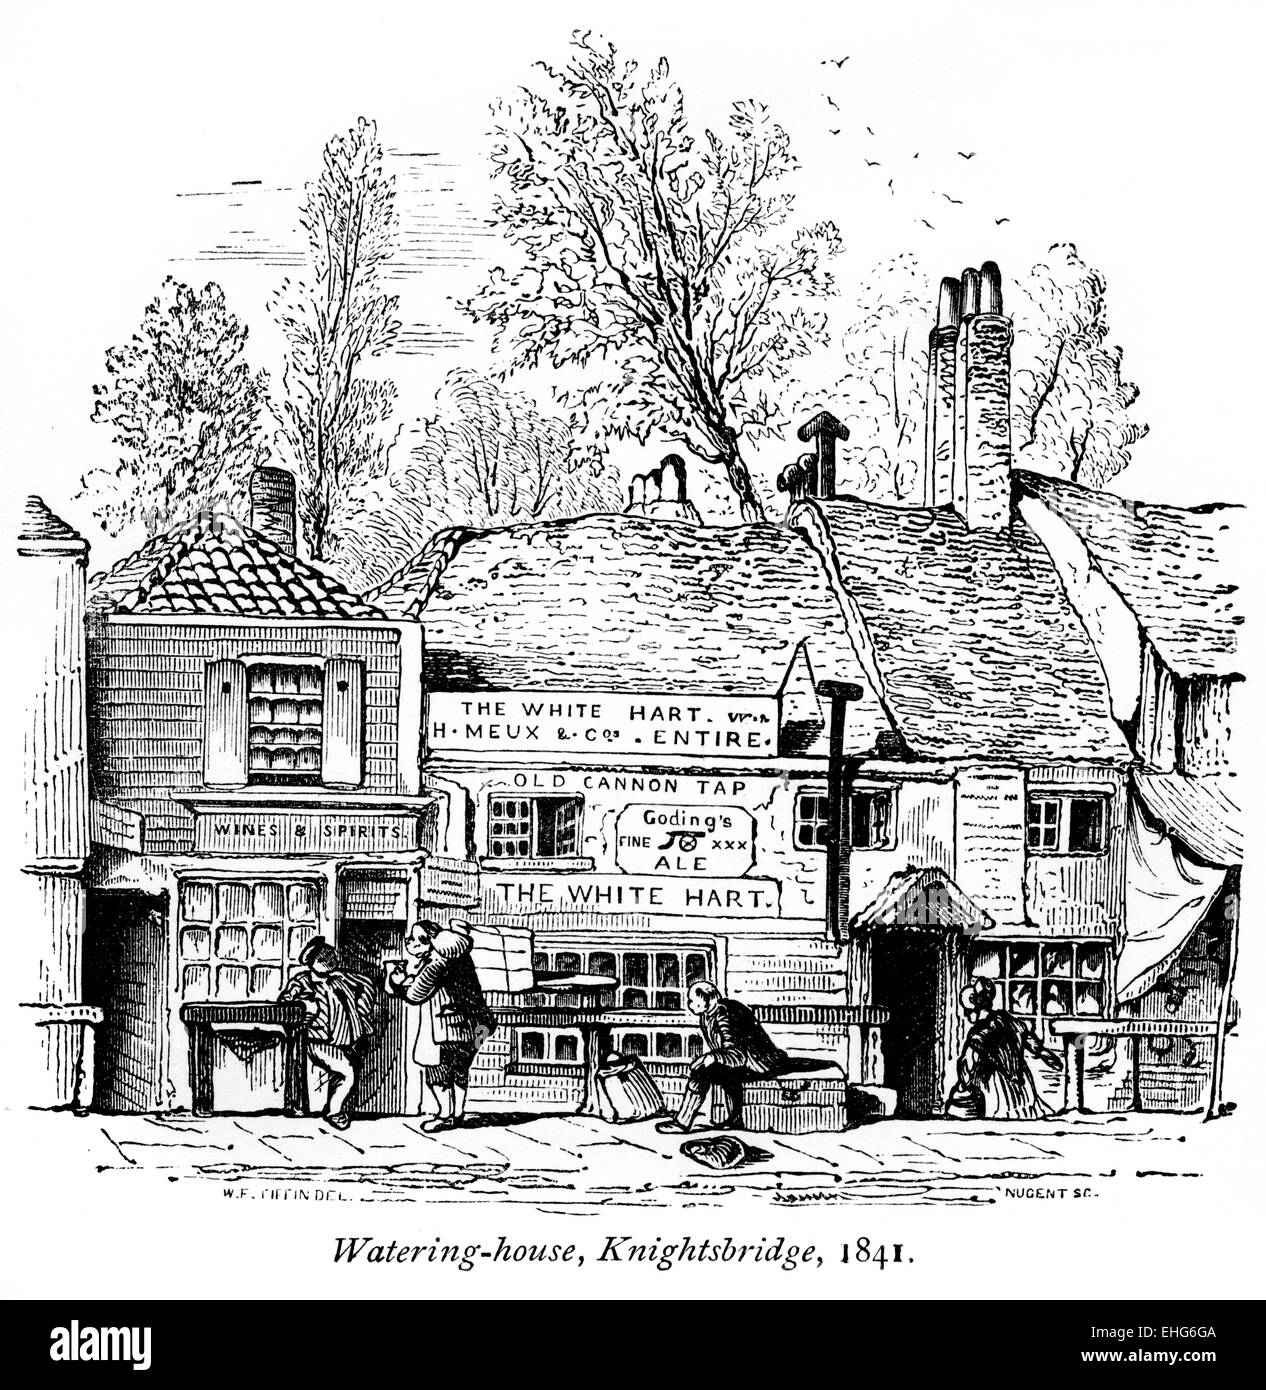 An engraving of a Watering House (The White Hart), Knightsbridge in 1841 scanned at high resolution from a book printed in 1867. Stock Photo